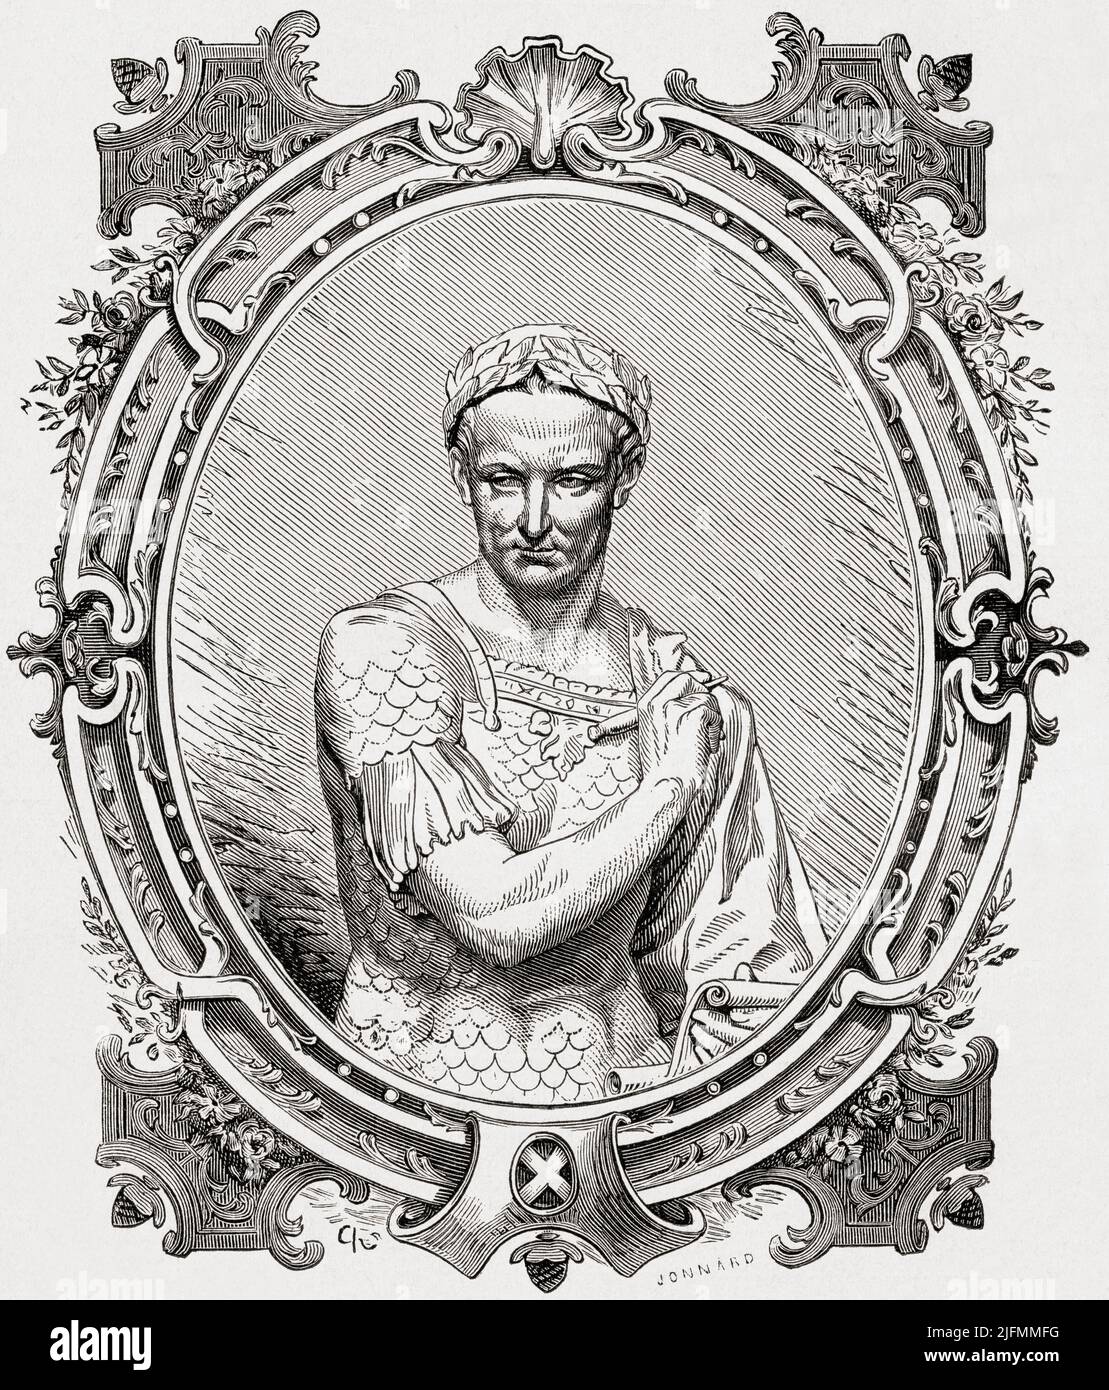 Gaius Julius Caesar, 100 BC – 44 BC. Roman general and statesman.  From Histoire de France, published 1855. Stock Photo